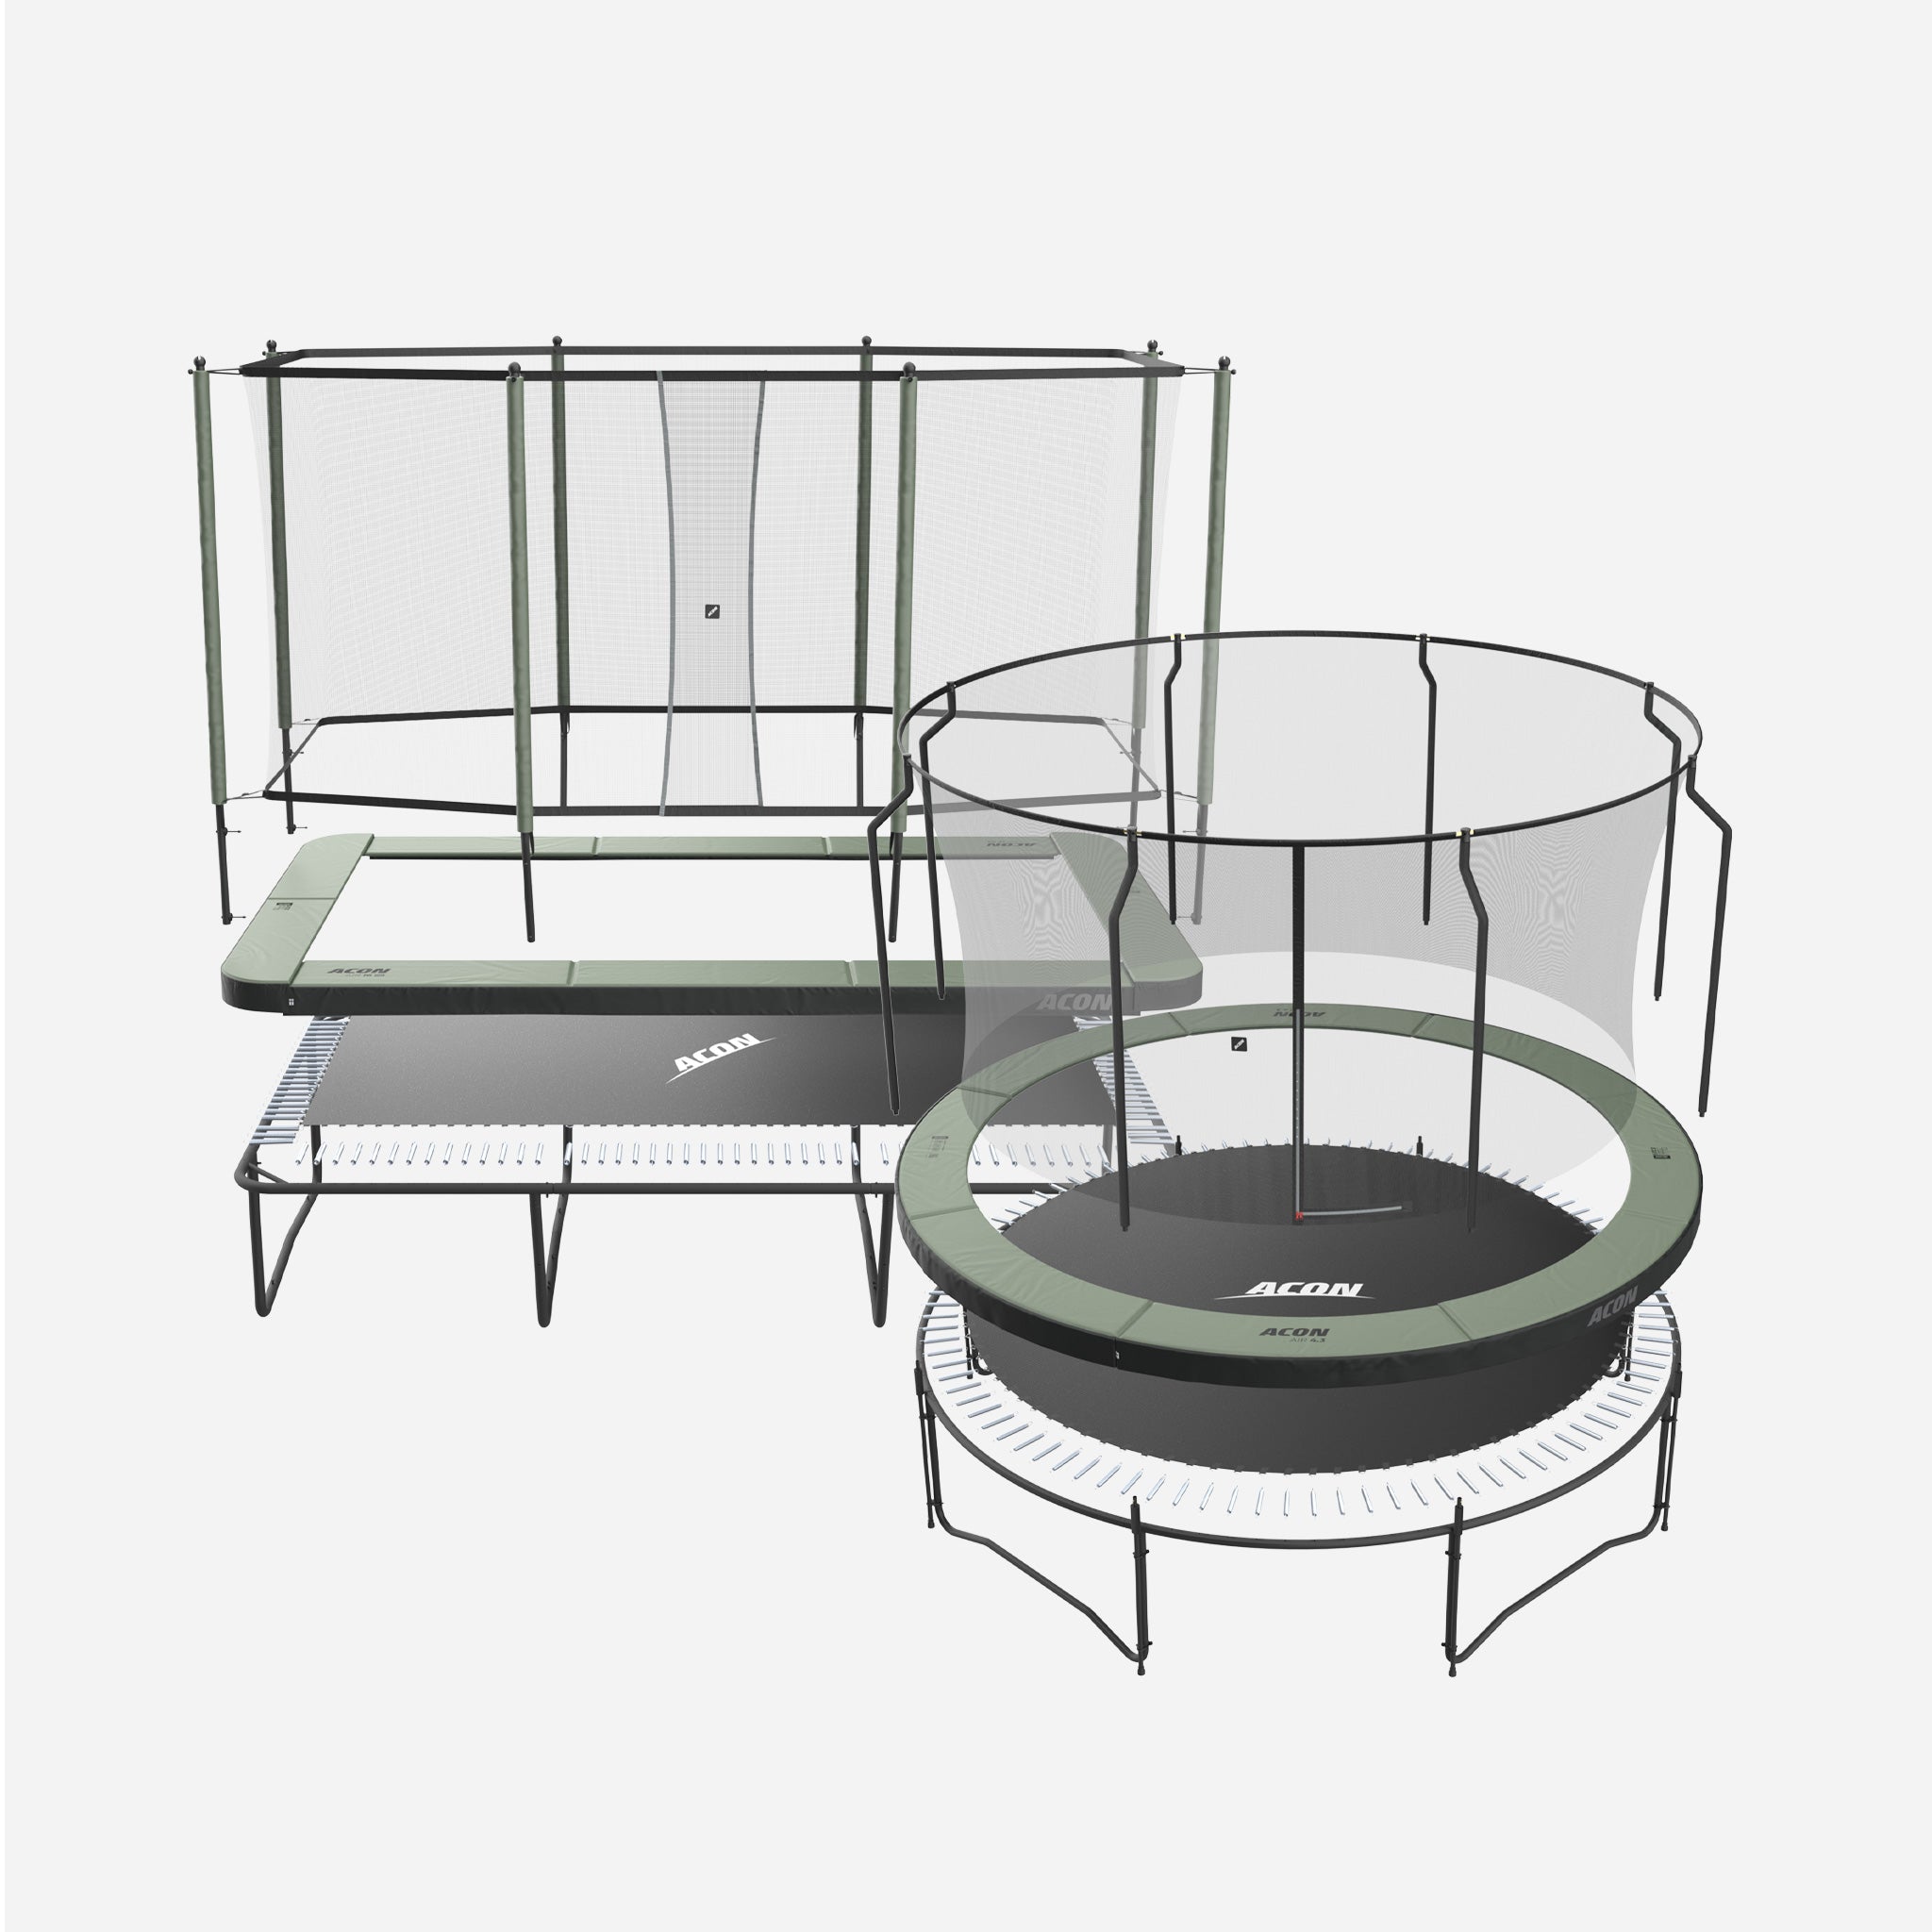 Blow-up images of ACON Air rectangular and round trampolines